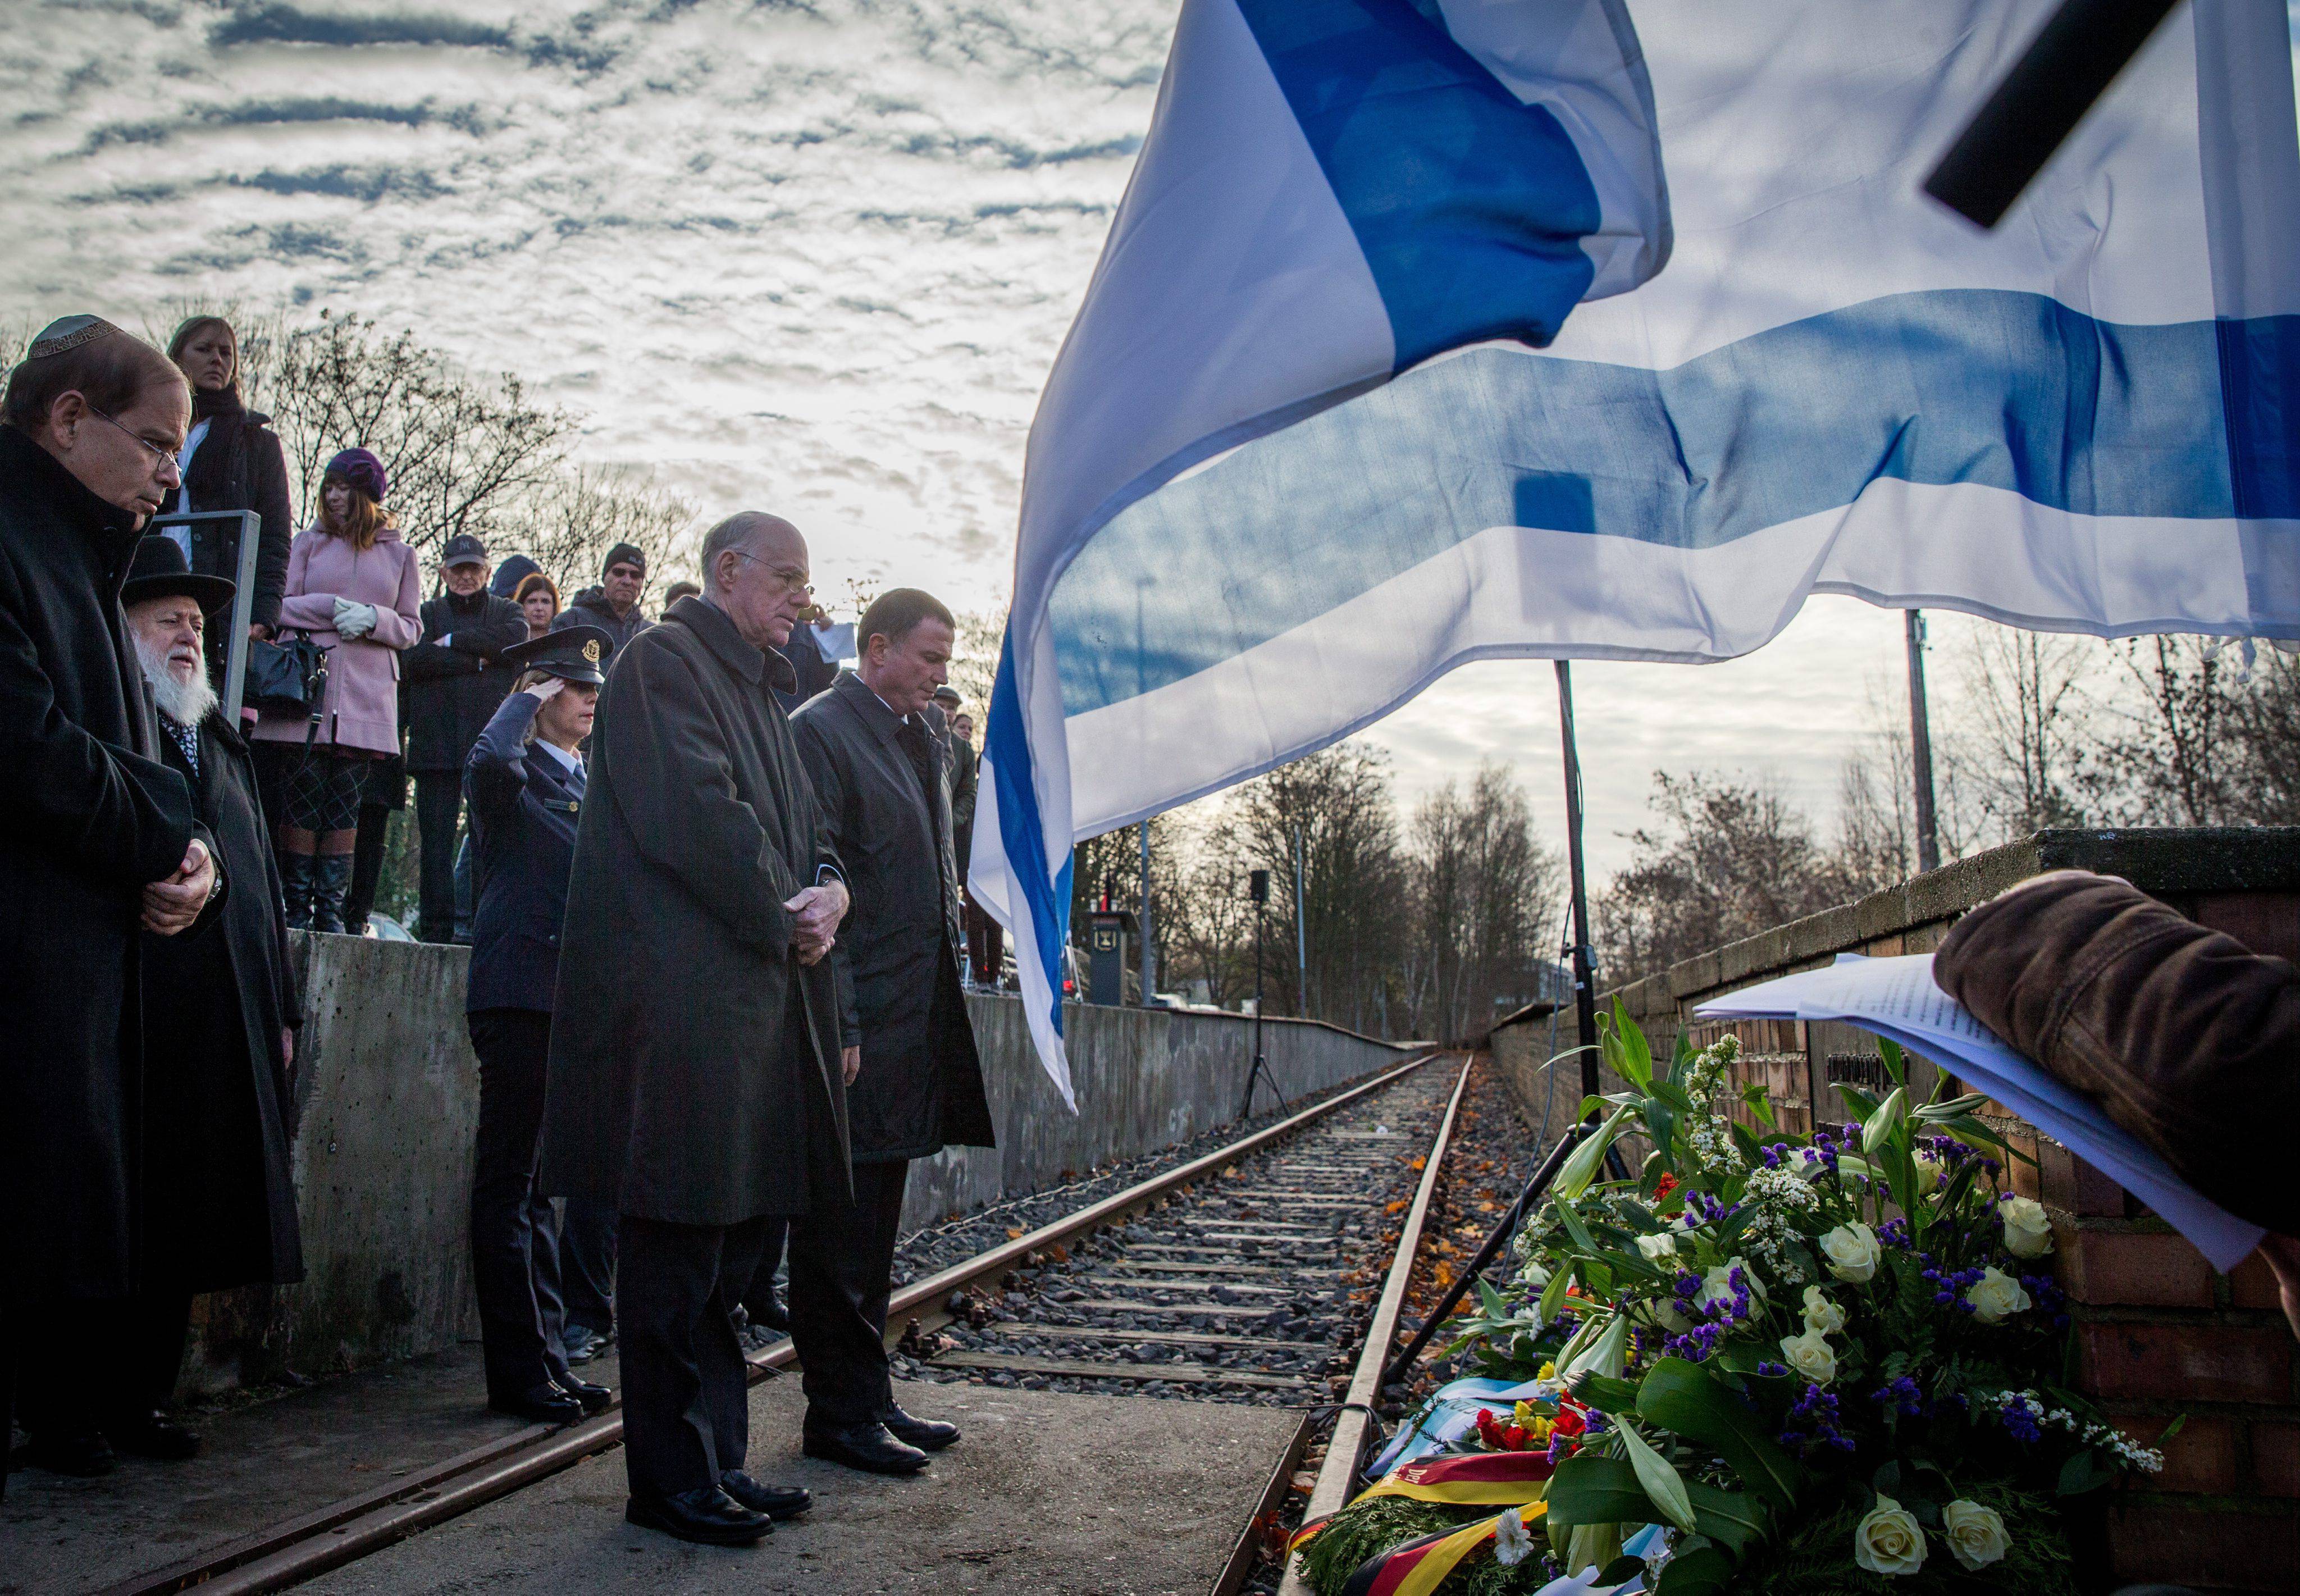  Norbert Lammert (C), president of the German Bundestag parliament, and his Israeli counterpart, Yuli Edelstein, lay a wreath at the Platform 17 Memorial at Grunewald railway station in Berlin, Germany, 1 December 2015. (Photo: EPA)